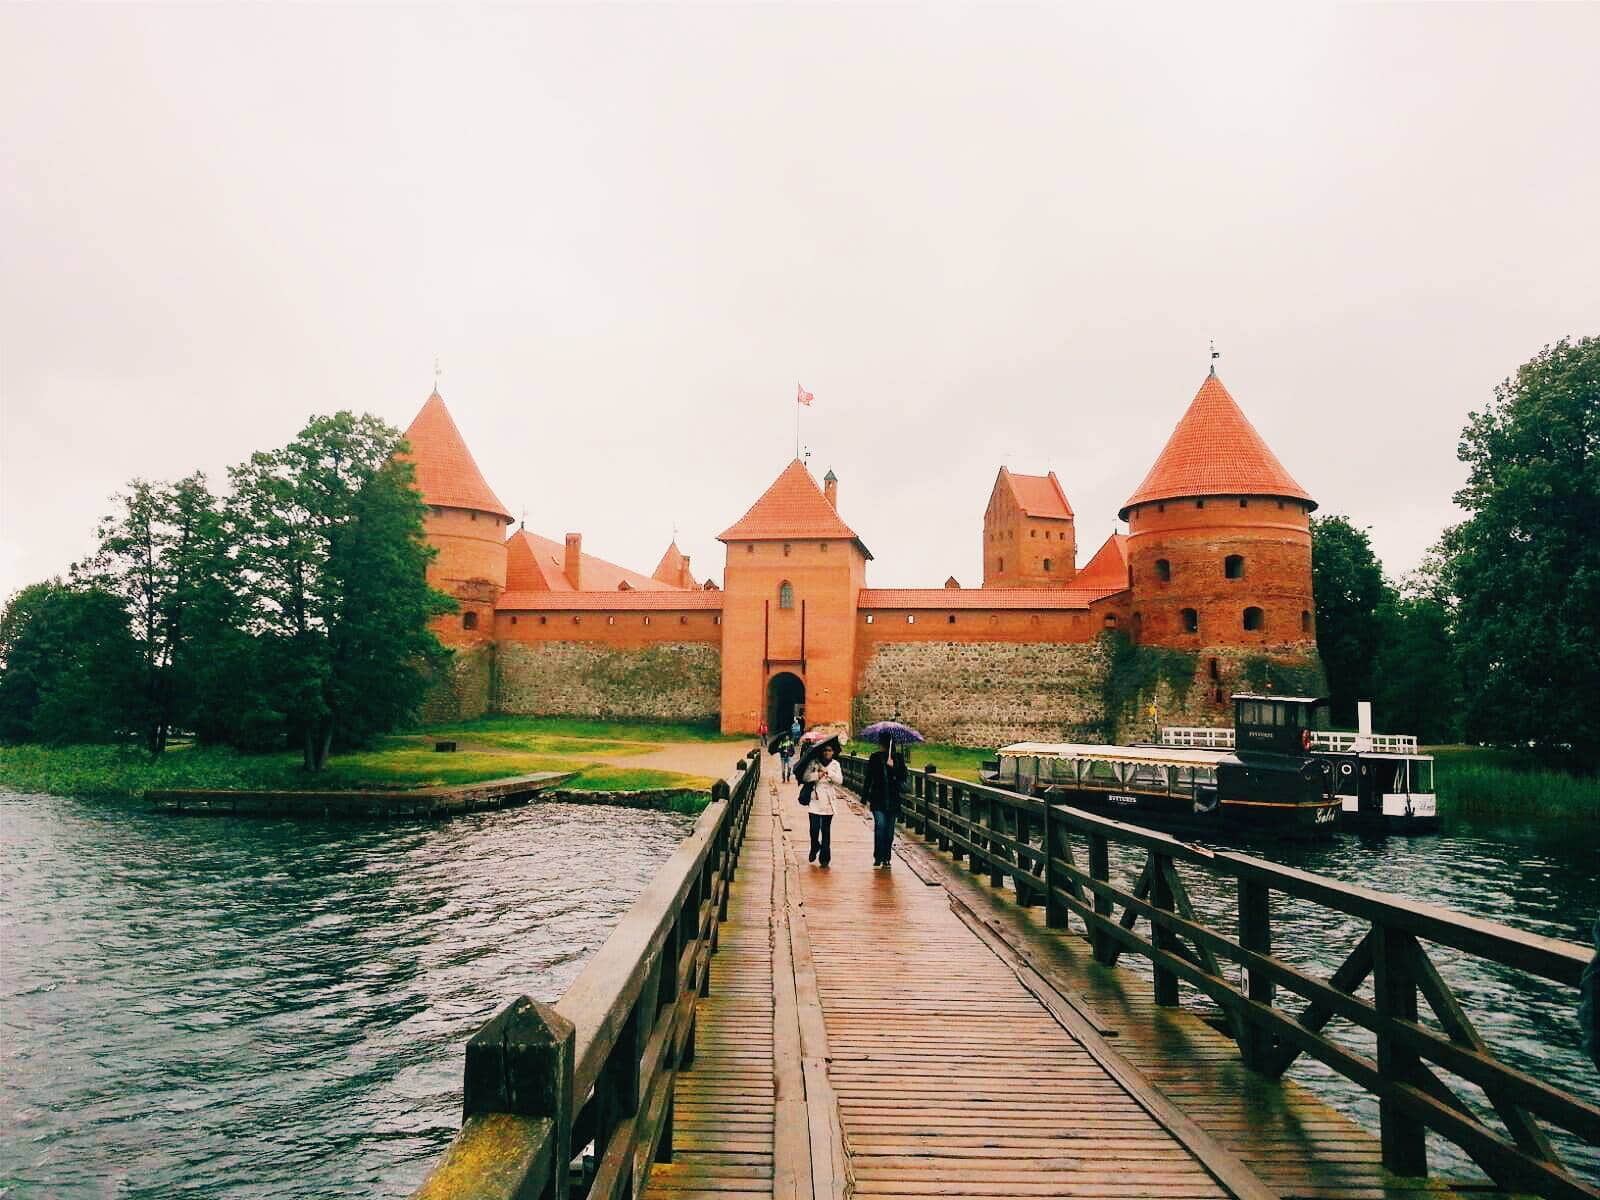 Trakai Lithuania is a very touristic spot in the country. 